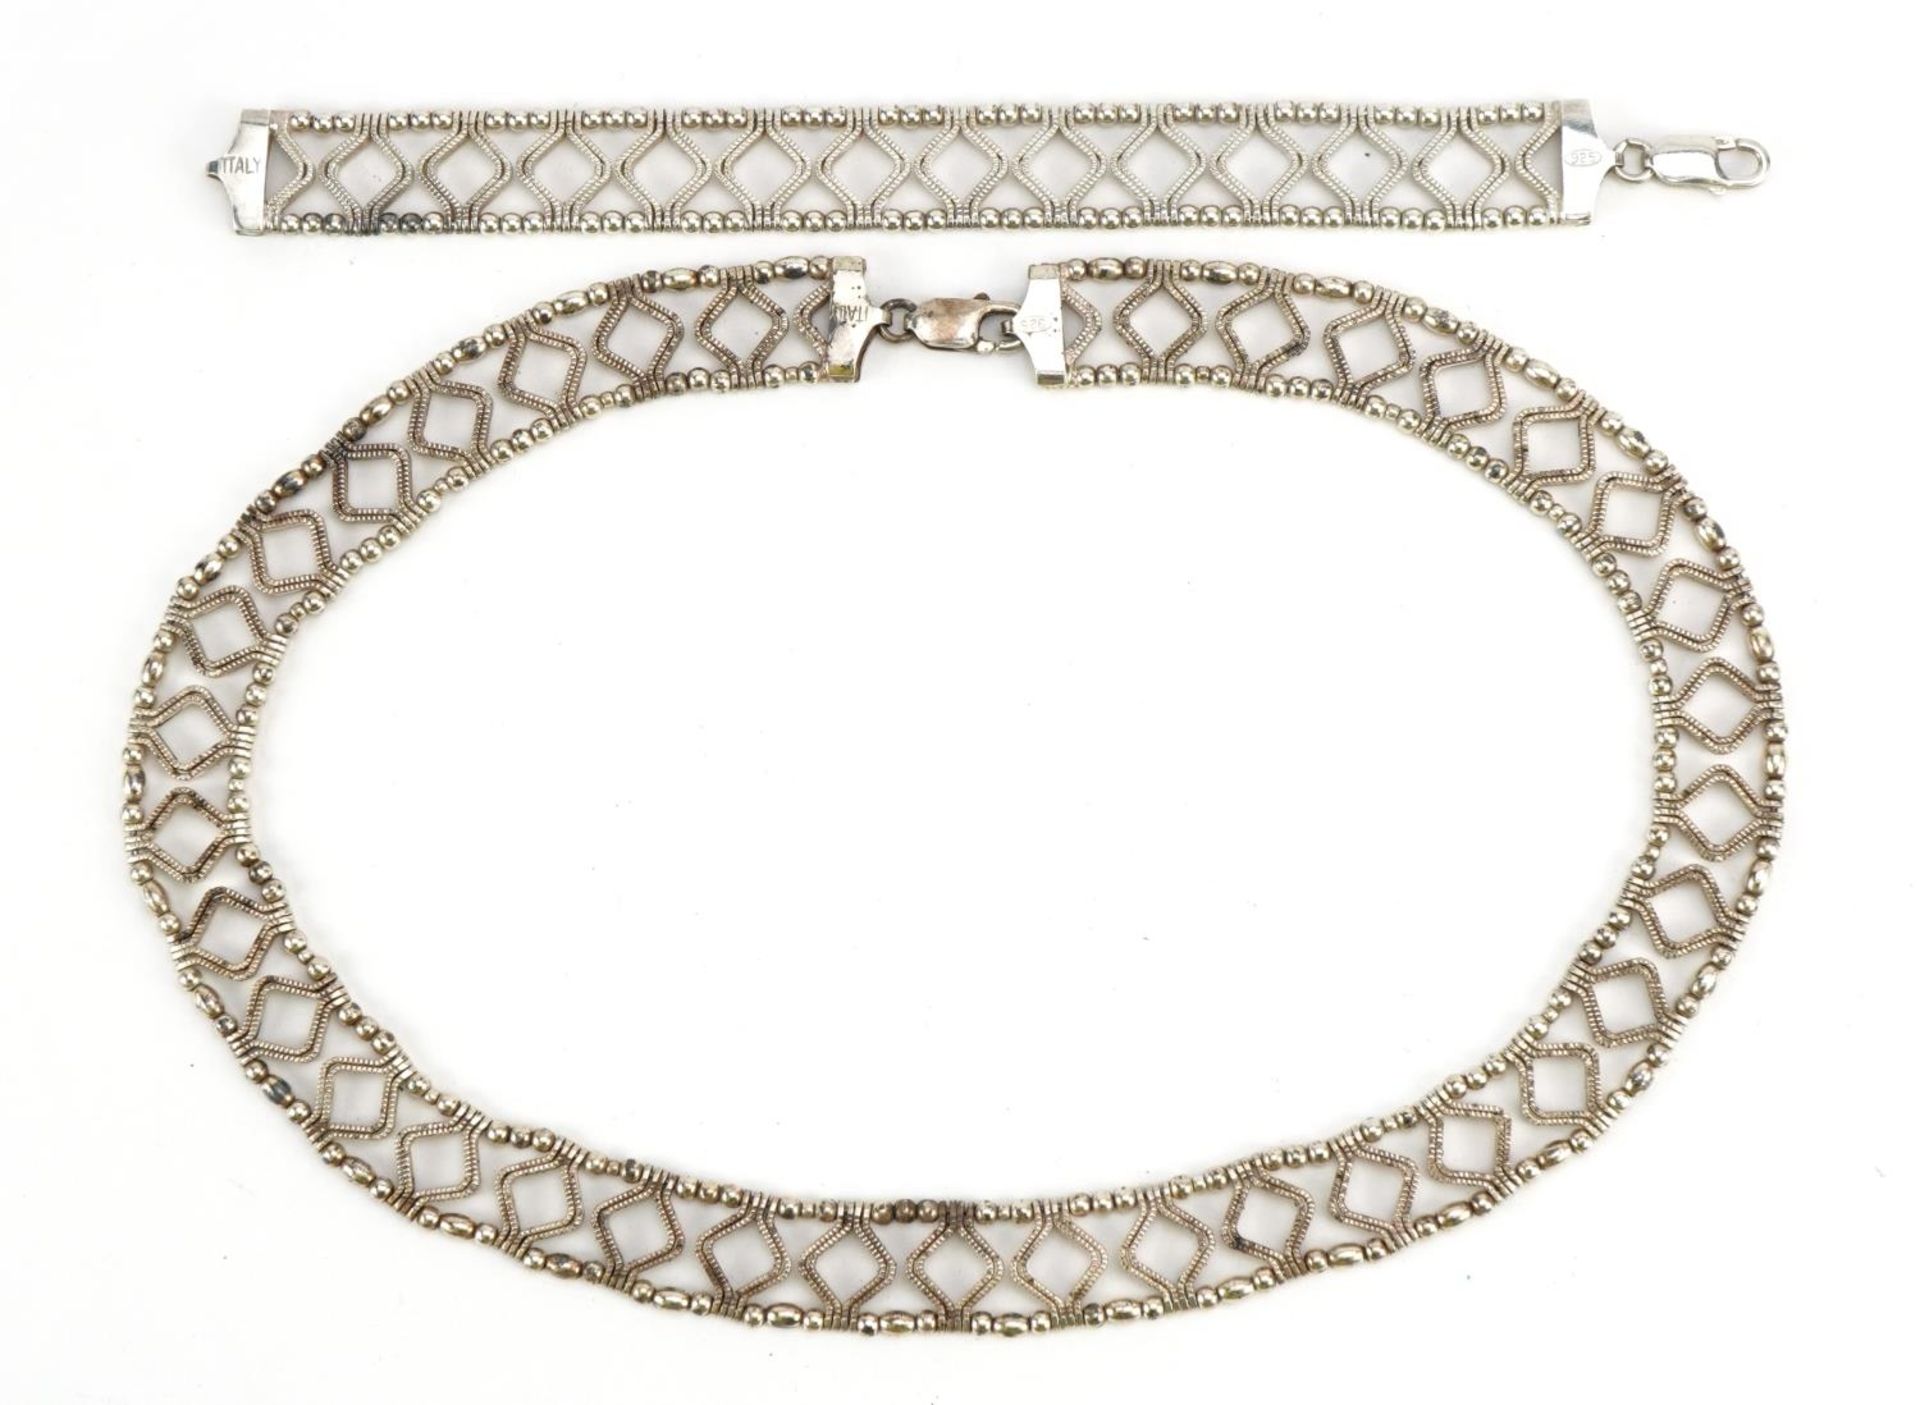 Stylish silver choker necklace and matching bracelet, the bracelet 19cm in length, total 94.8g - Image 2 of 4